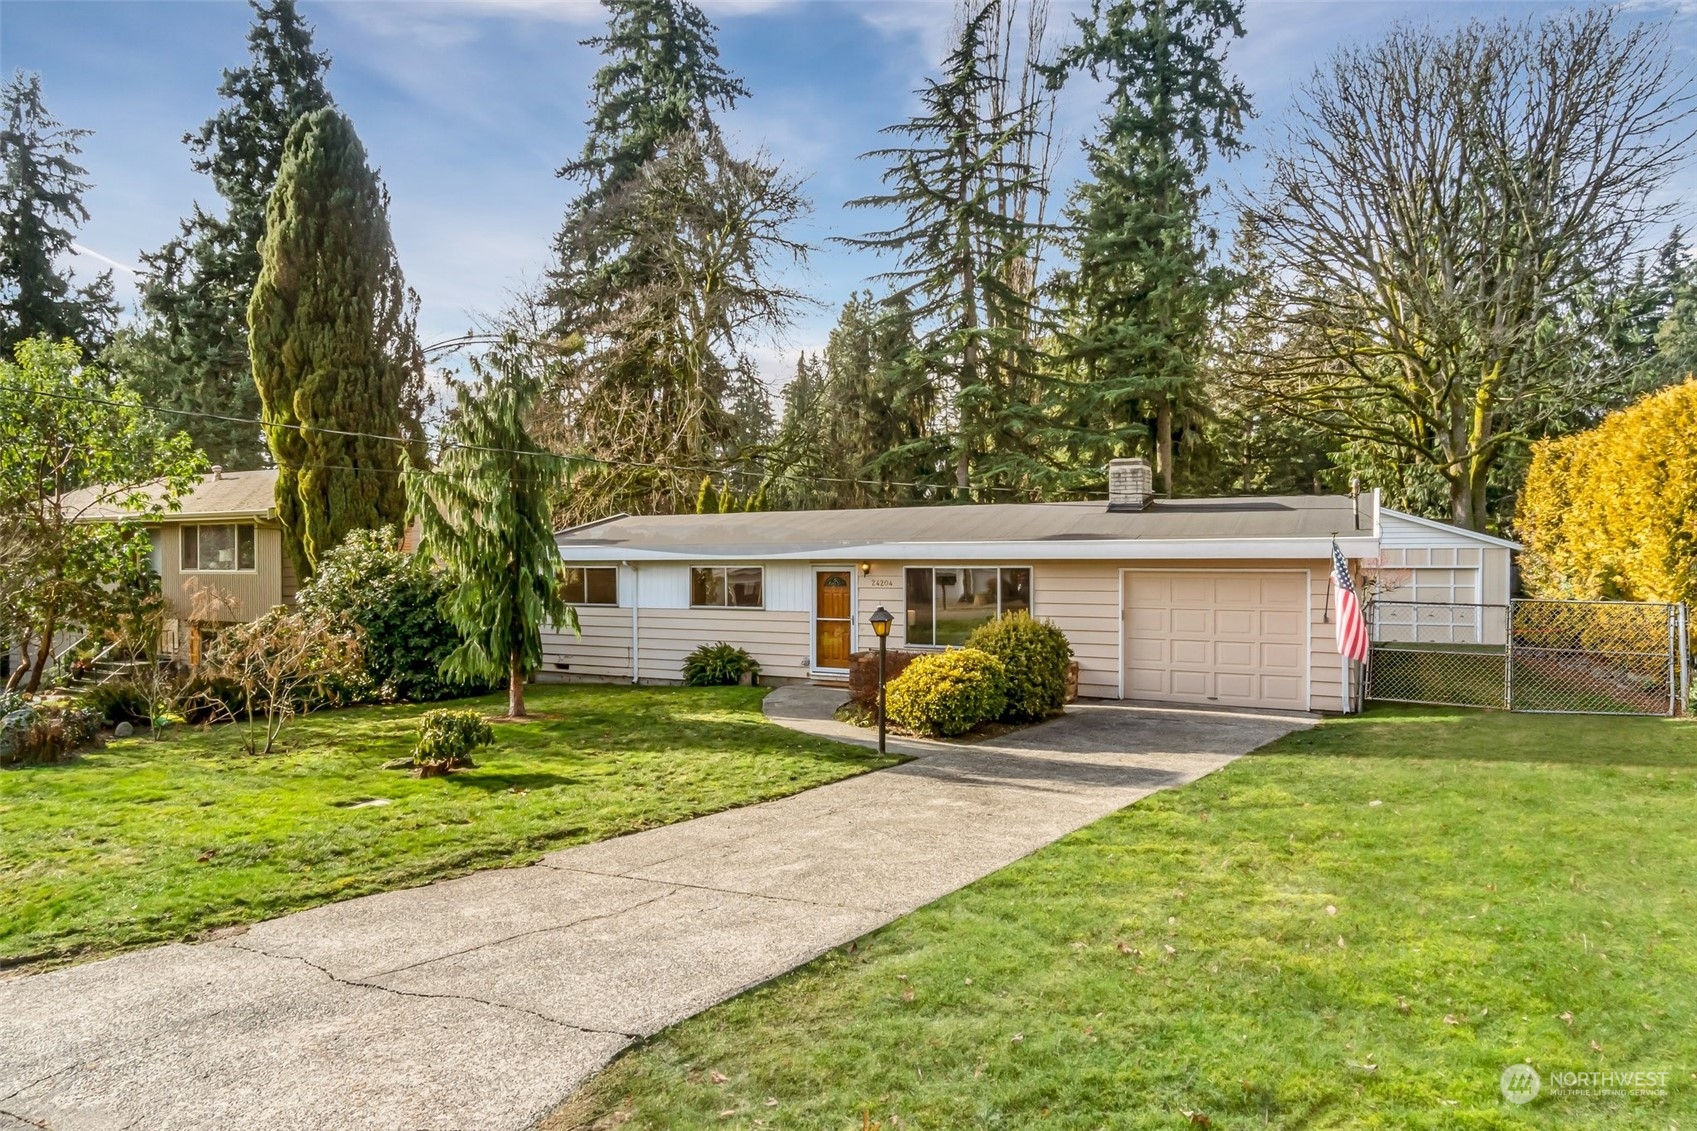 Homes for sale in Bothell | View 24204 2nd Place | 3 Beds, 1 Bath